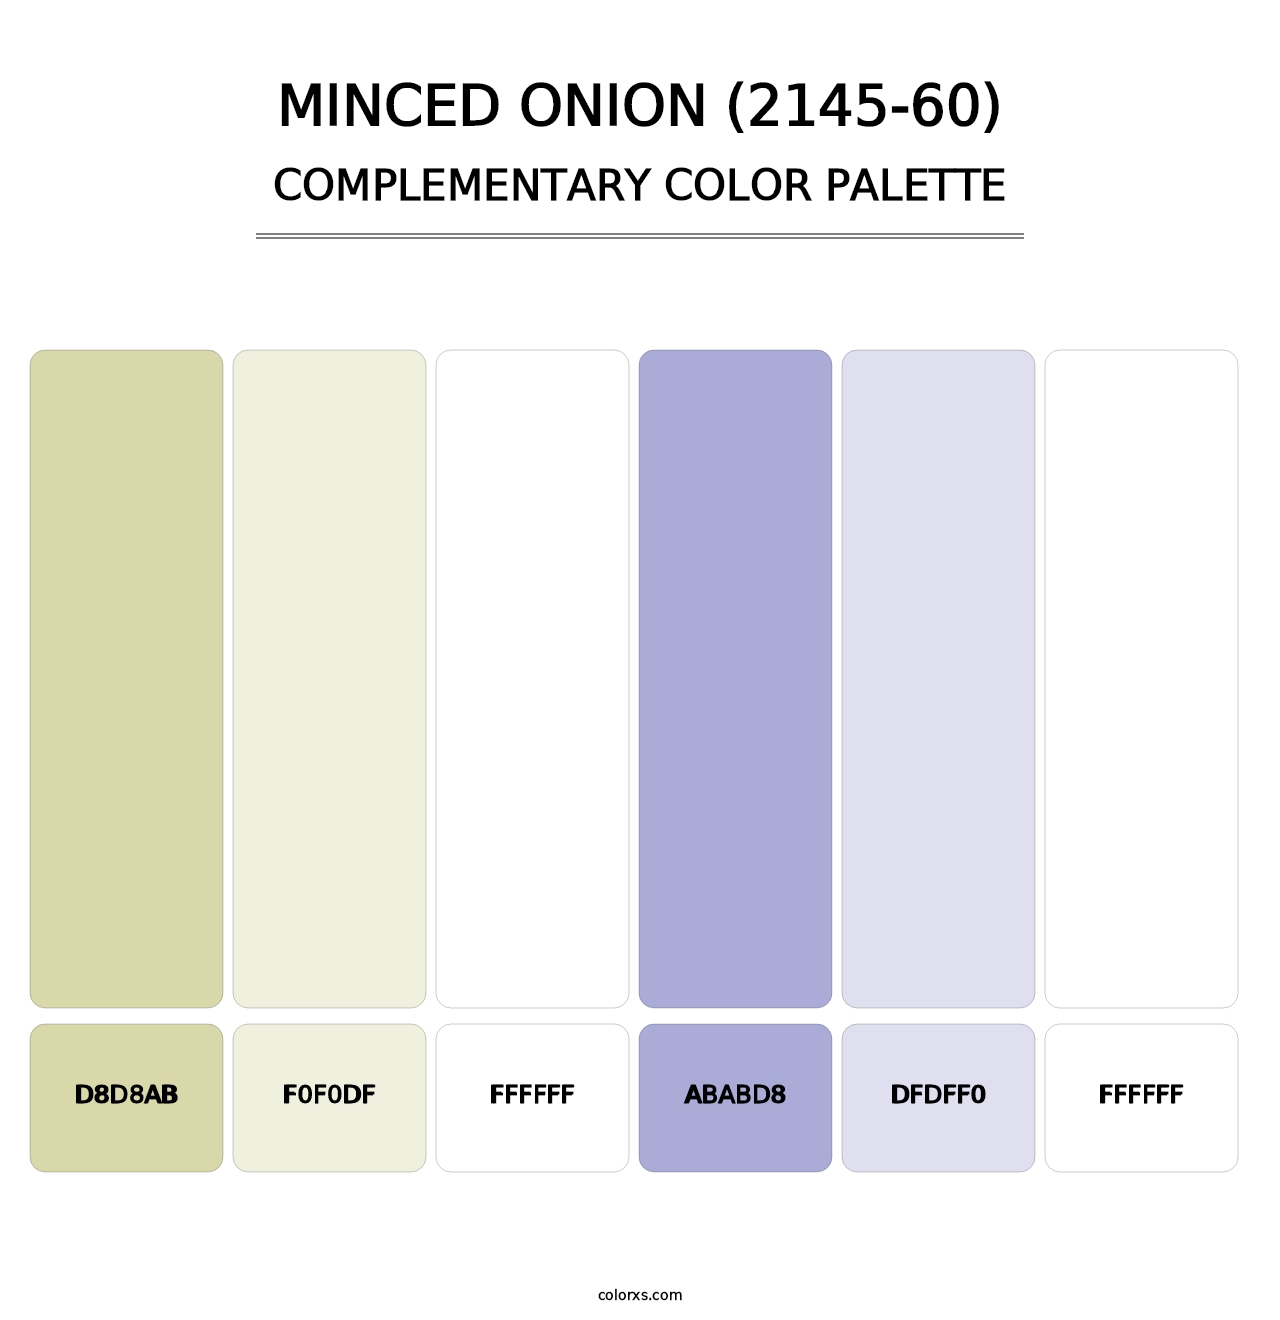 Minced Onion (2145-60) - Complementary Color Palette